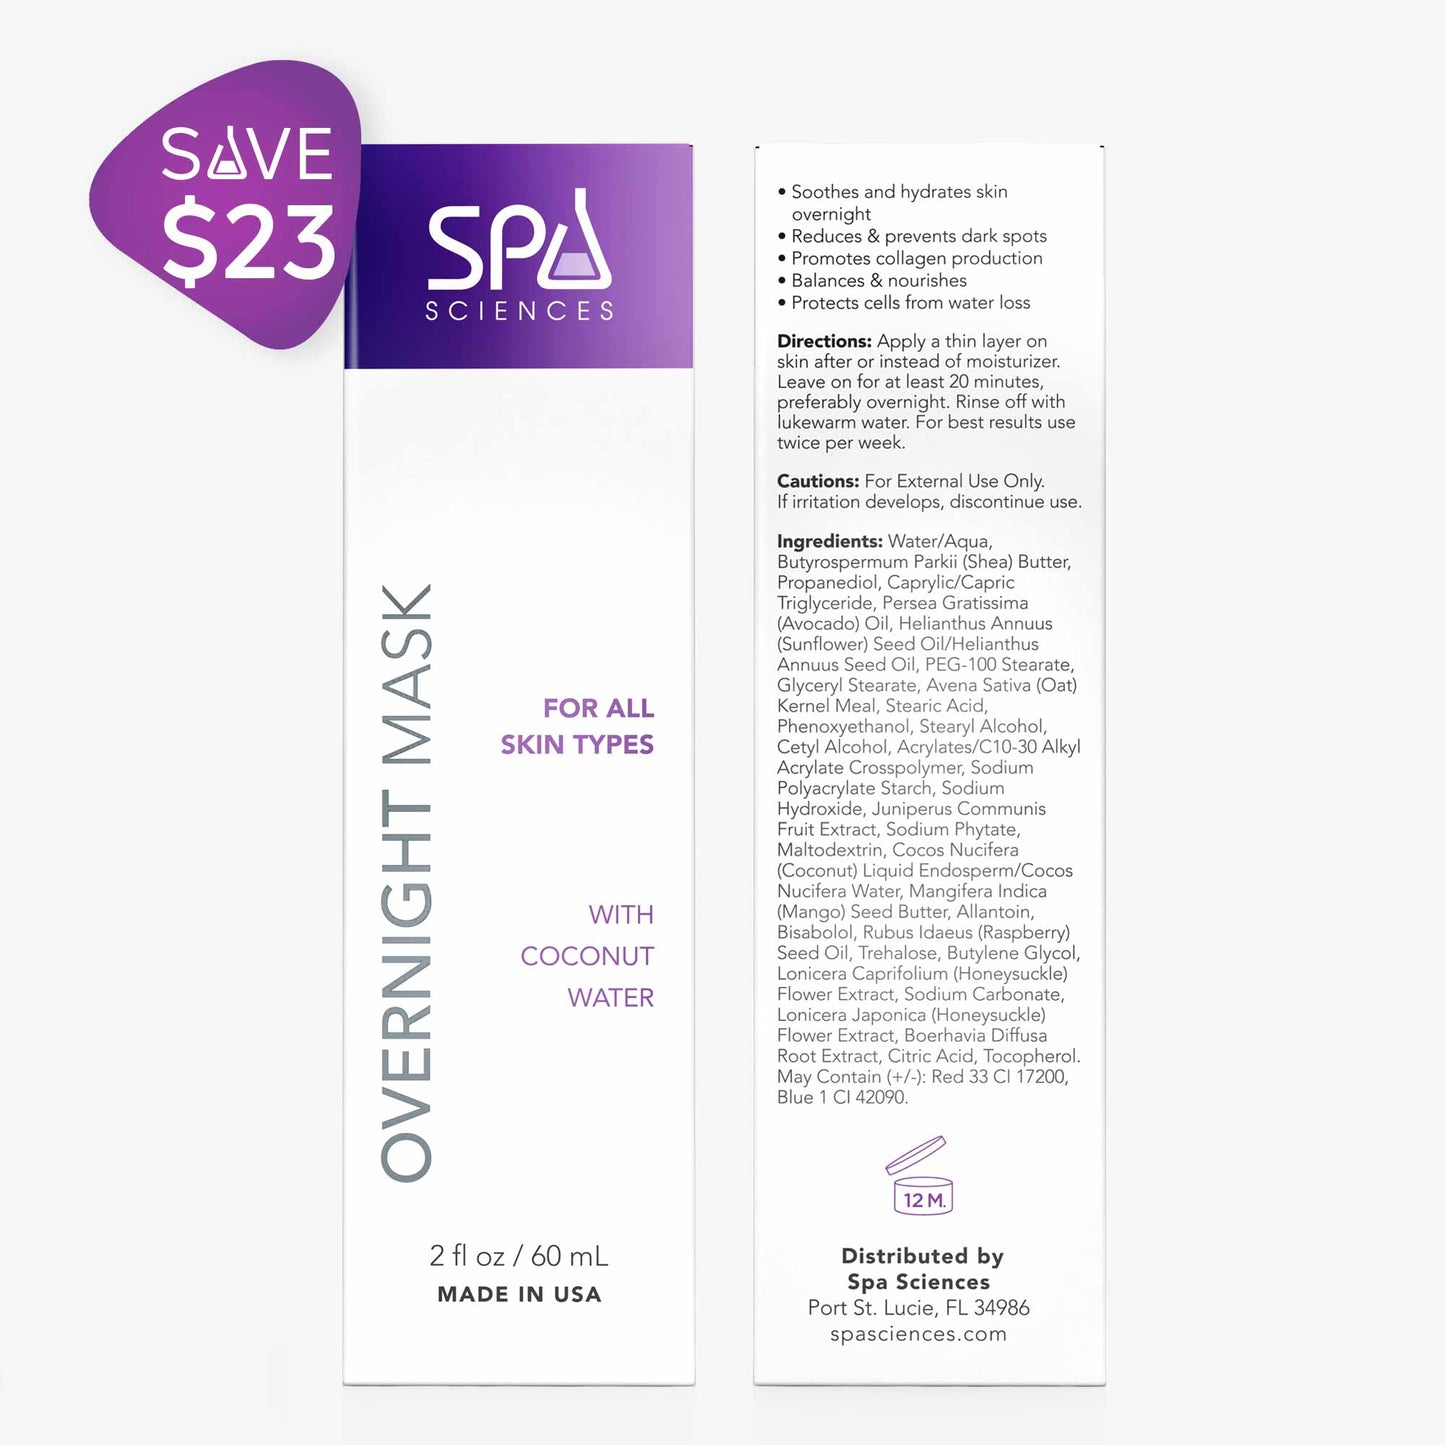 A package of Spa Sciences Sensitive Skin Starter Pack with a purple and white label.